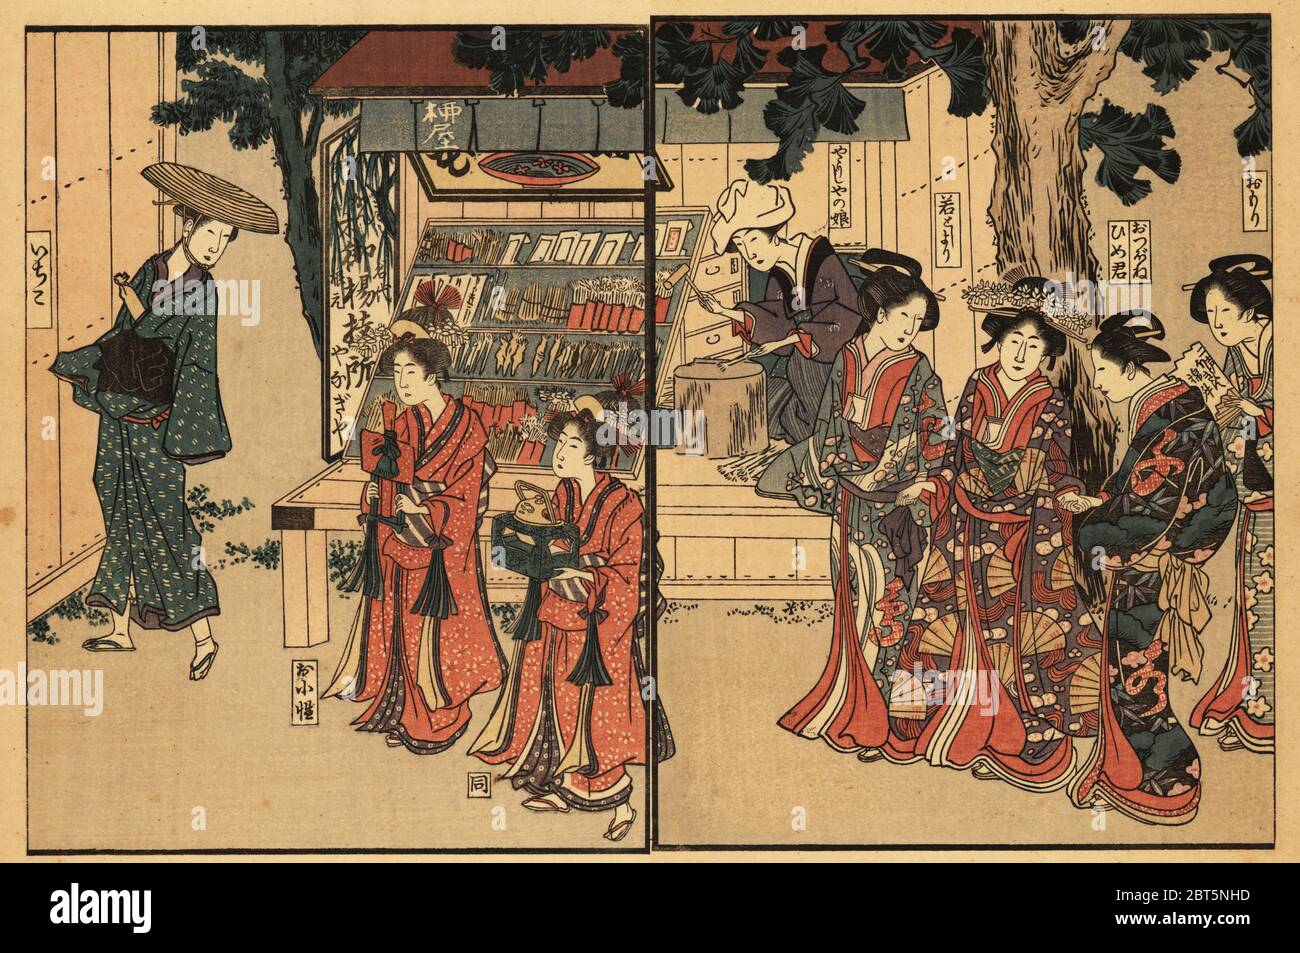 Aristocratic women parading passing a yojiya, a shop selling brushes and toothpicks, Tokyo, 18th century. Young maids carry a mirror and a portable stove in front of four women in fine kimono Female pilgrim ichiko at left. Handcoloured ukiyo-e woodblock print by Toyokuni Utagawa from Shikitei Sanbas Ehon Imayo Sugata (Picture Book of the Modern Forms and Figures, Tokyo, 1916. Reprint of the original from 1802. Handcoloured ukiyo-e woodblock print by Toyokuni Utagawa from Shikitei Sanbas Ehon Imayo Sugata (Picture Book of the Modern Forms and Figures, Tokyo, 1916. Reprint of the original from 1 Stock Photo